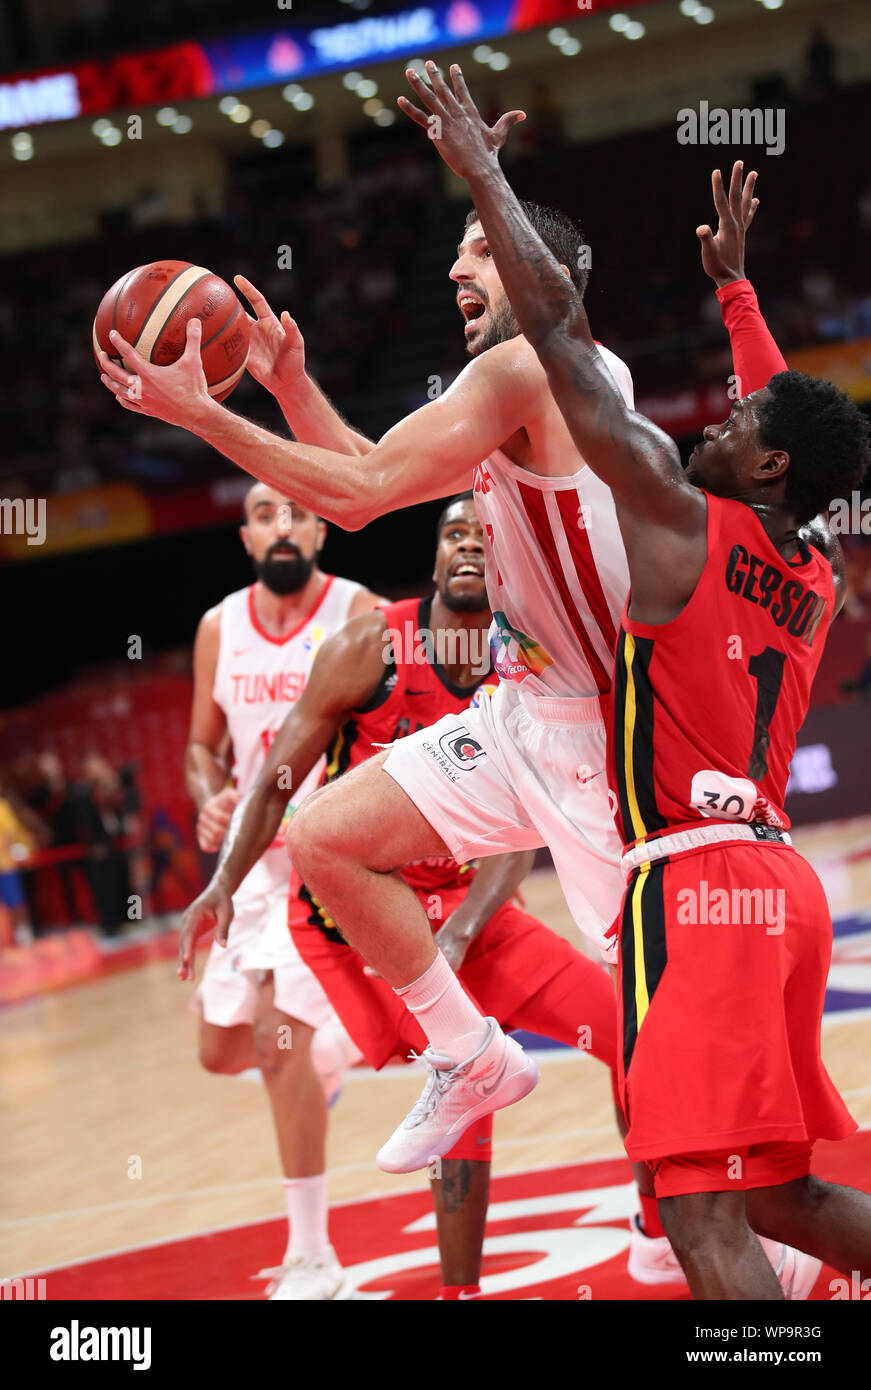 Beijing, China. 8th Sep, 2019. Mourad El Mabrouk (2nd R) of Tunisia goes up  for a basket as Gerson Domingos (1st R) of Angola defends during the group  N match between Tunisia